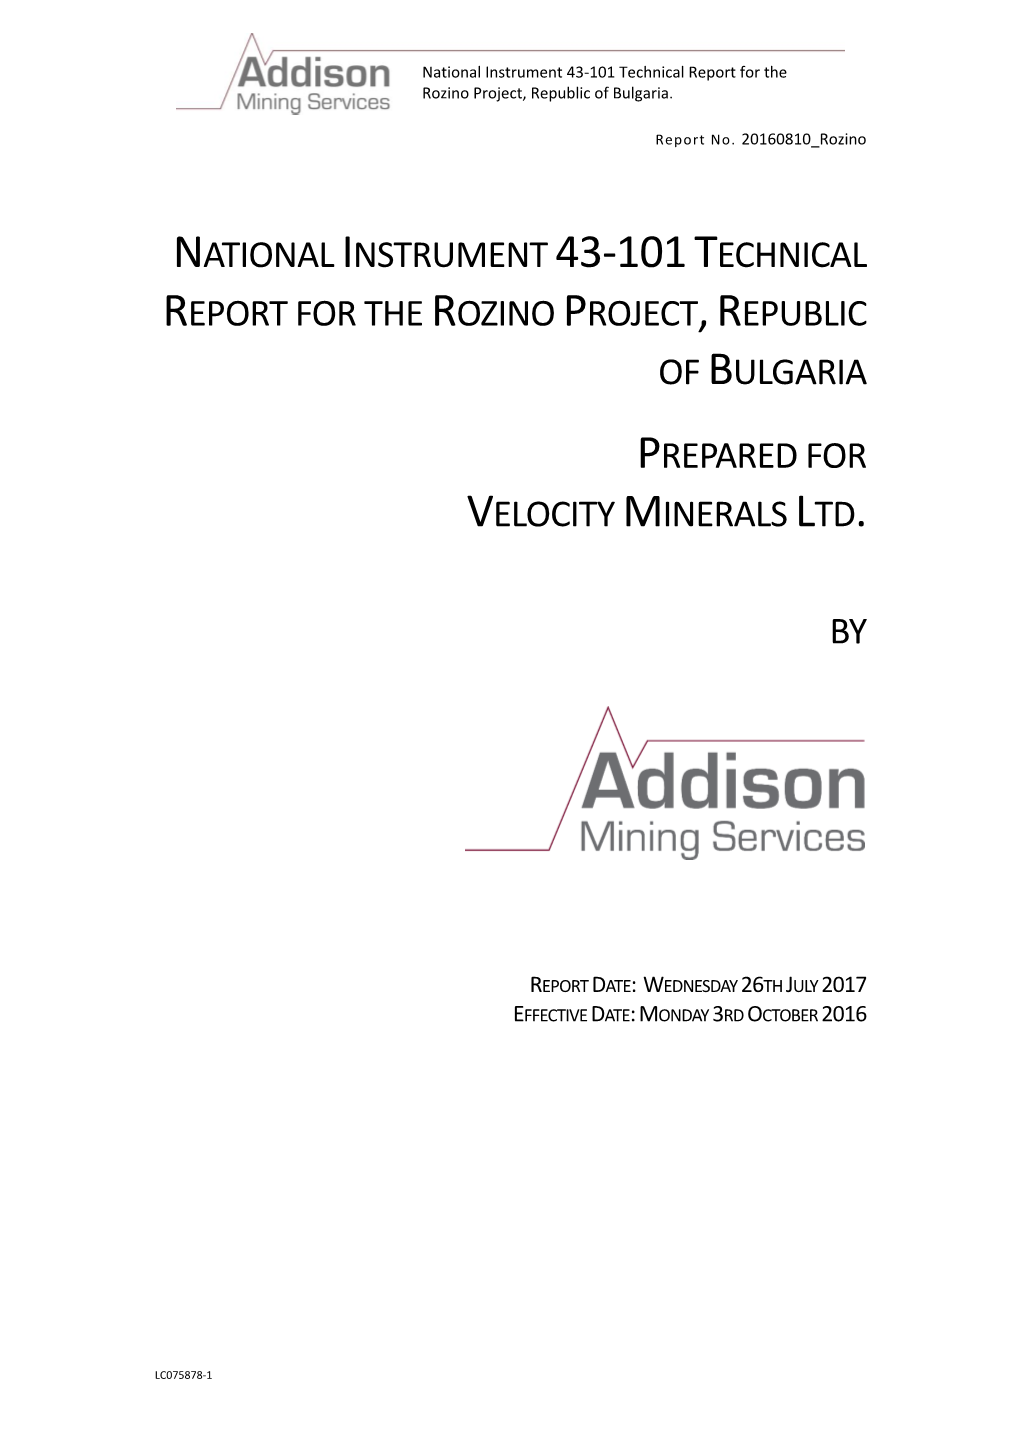 NI 43-101 Technical Report on the Rozino Property Has Included